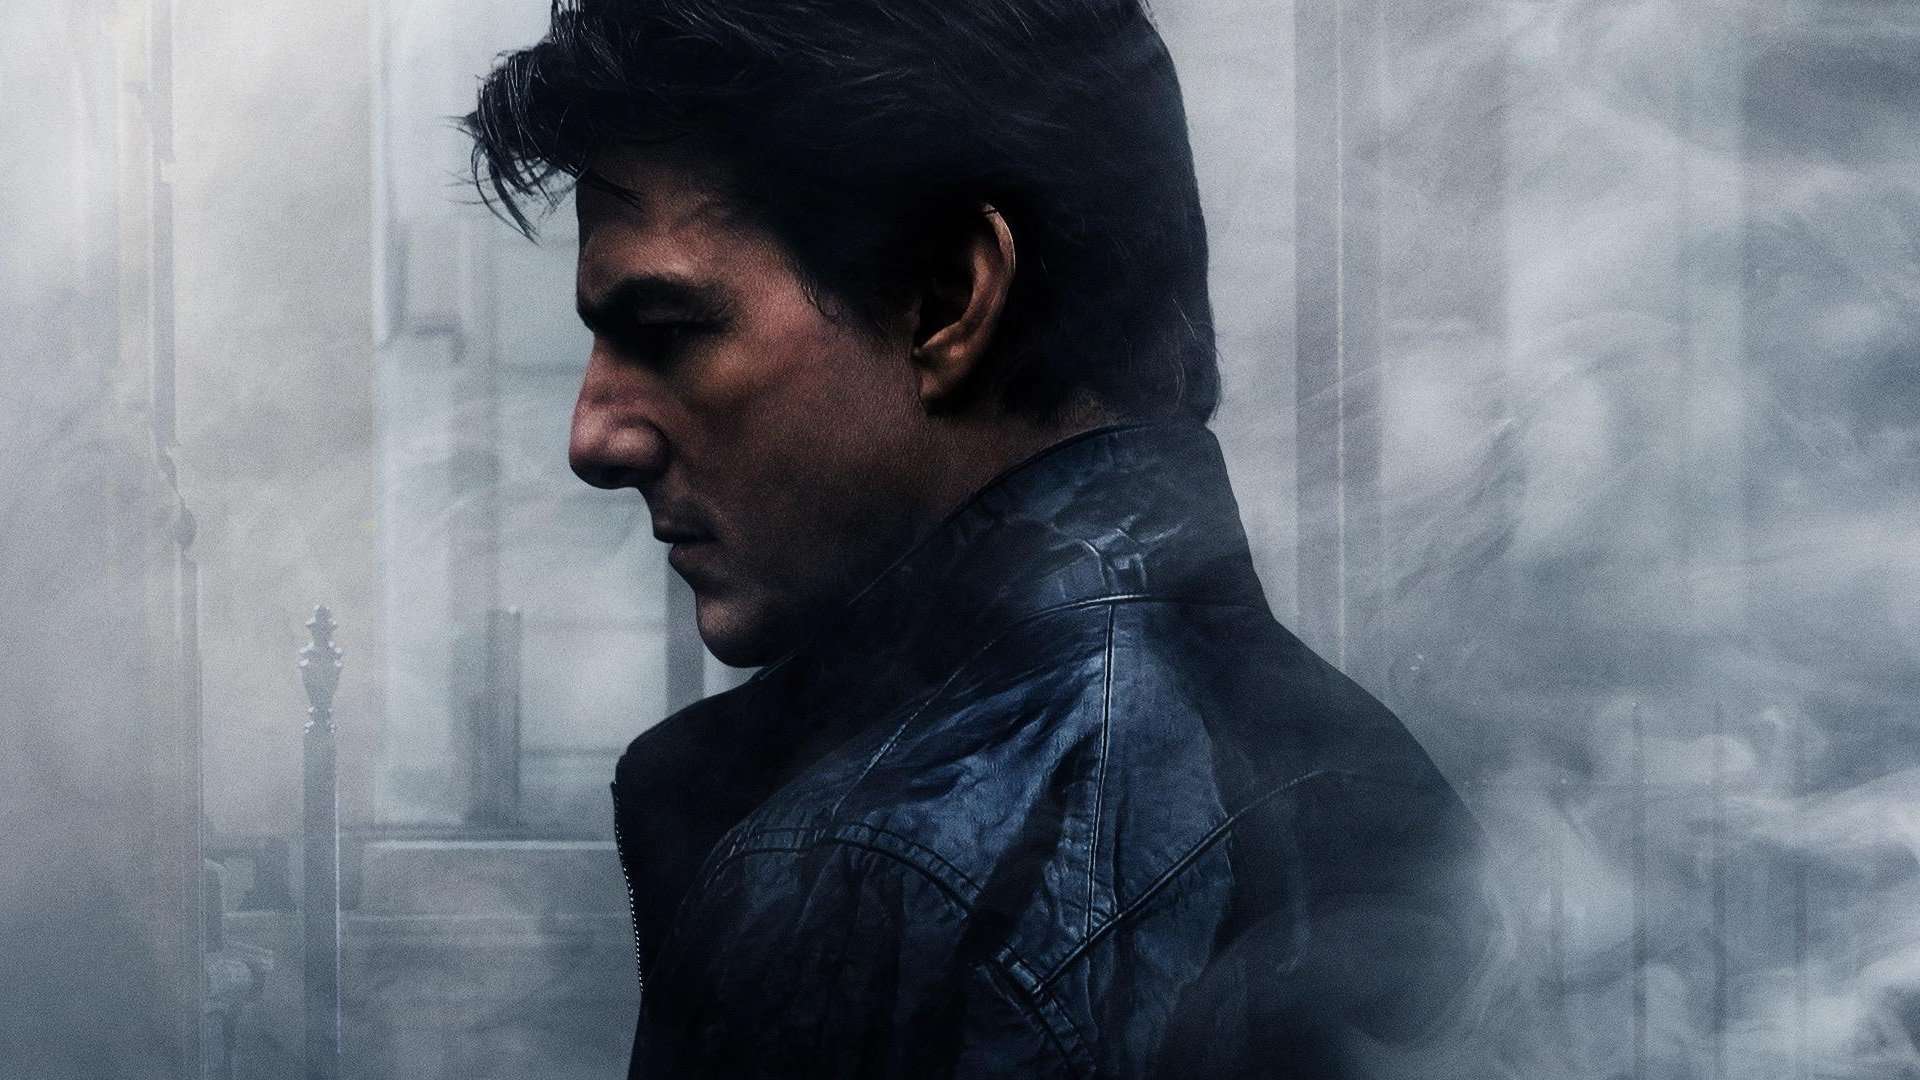 Image from the movie "Mission: Impossible - Rogue Nation"